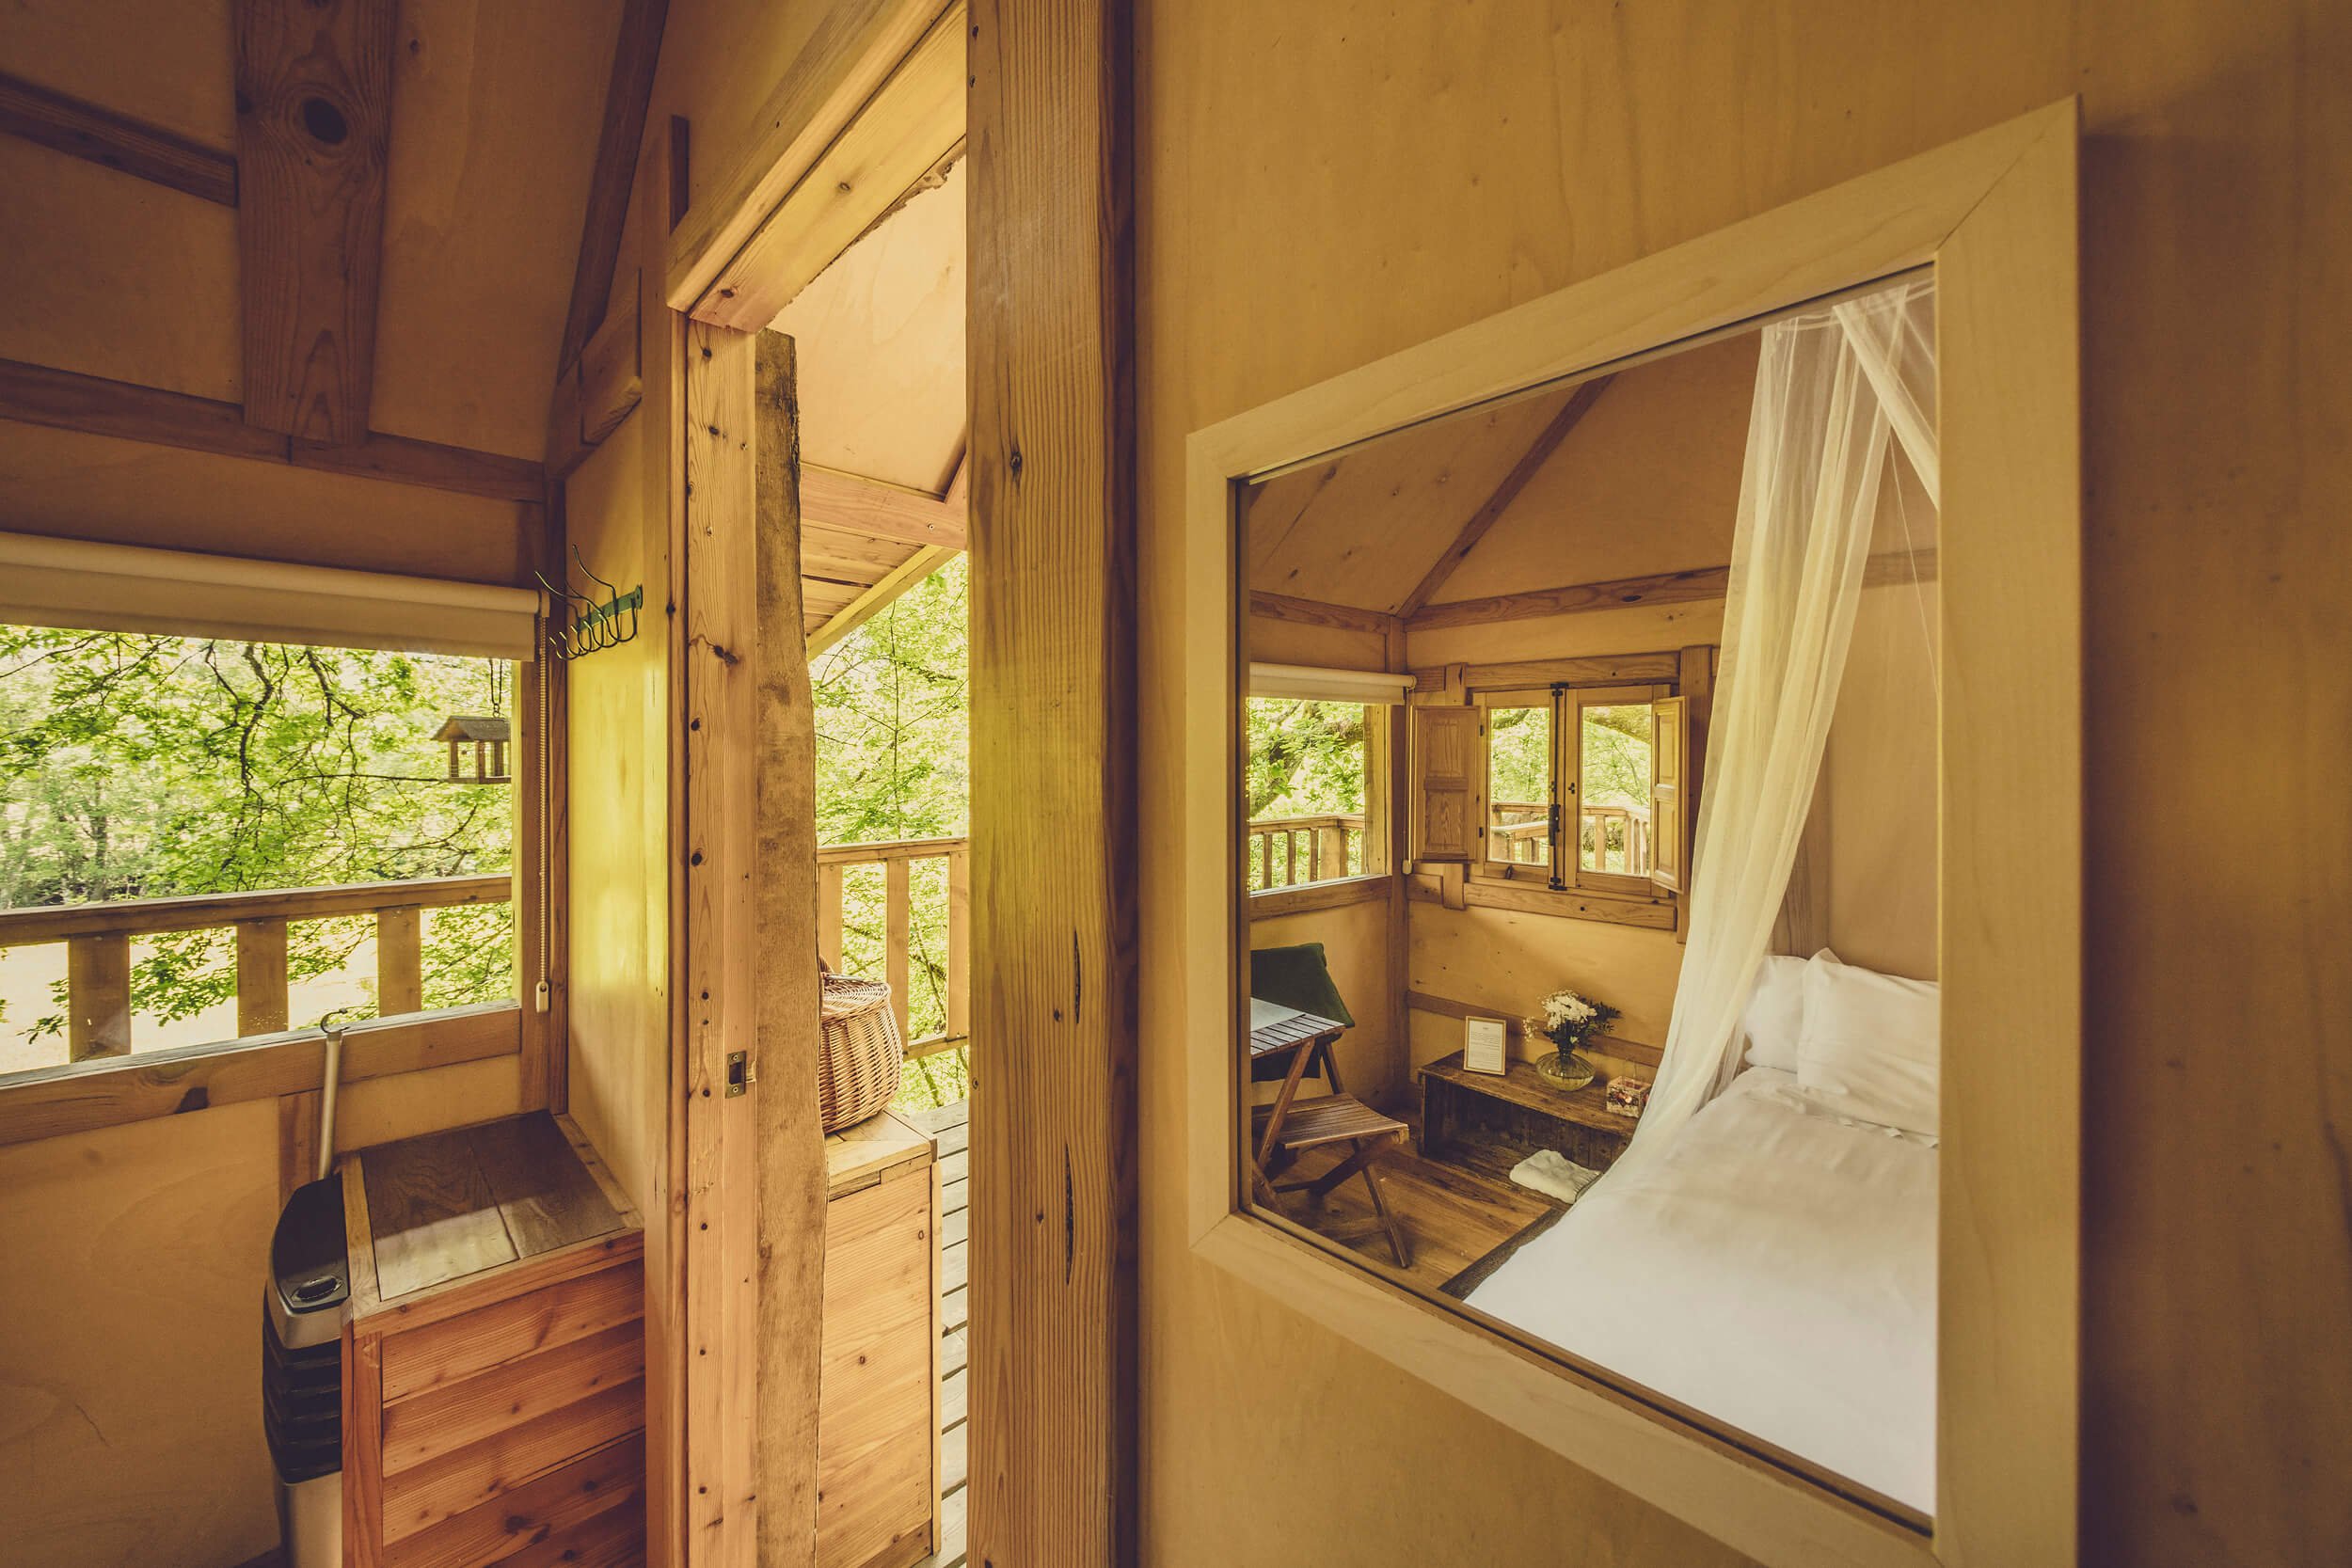 Escape to the forest- a look inside Basoa Suites' treehouses by MuruStudios advertising photographers in Madrid Barcelona Pamplona Spain 28.jpg